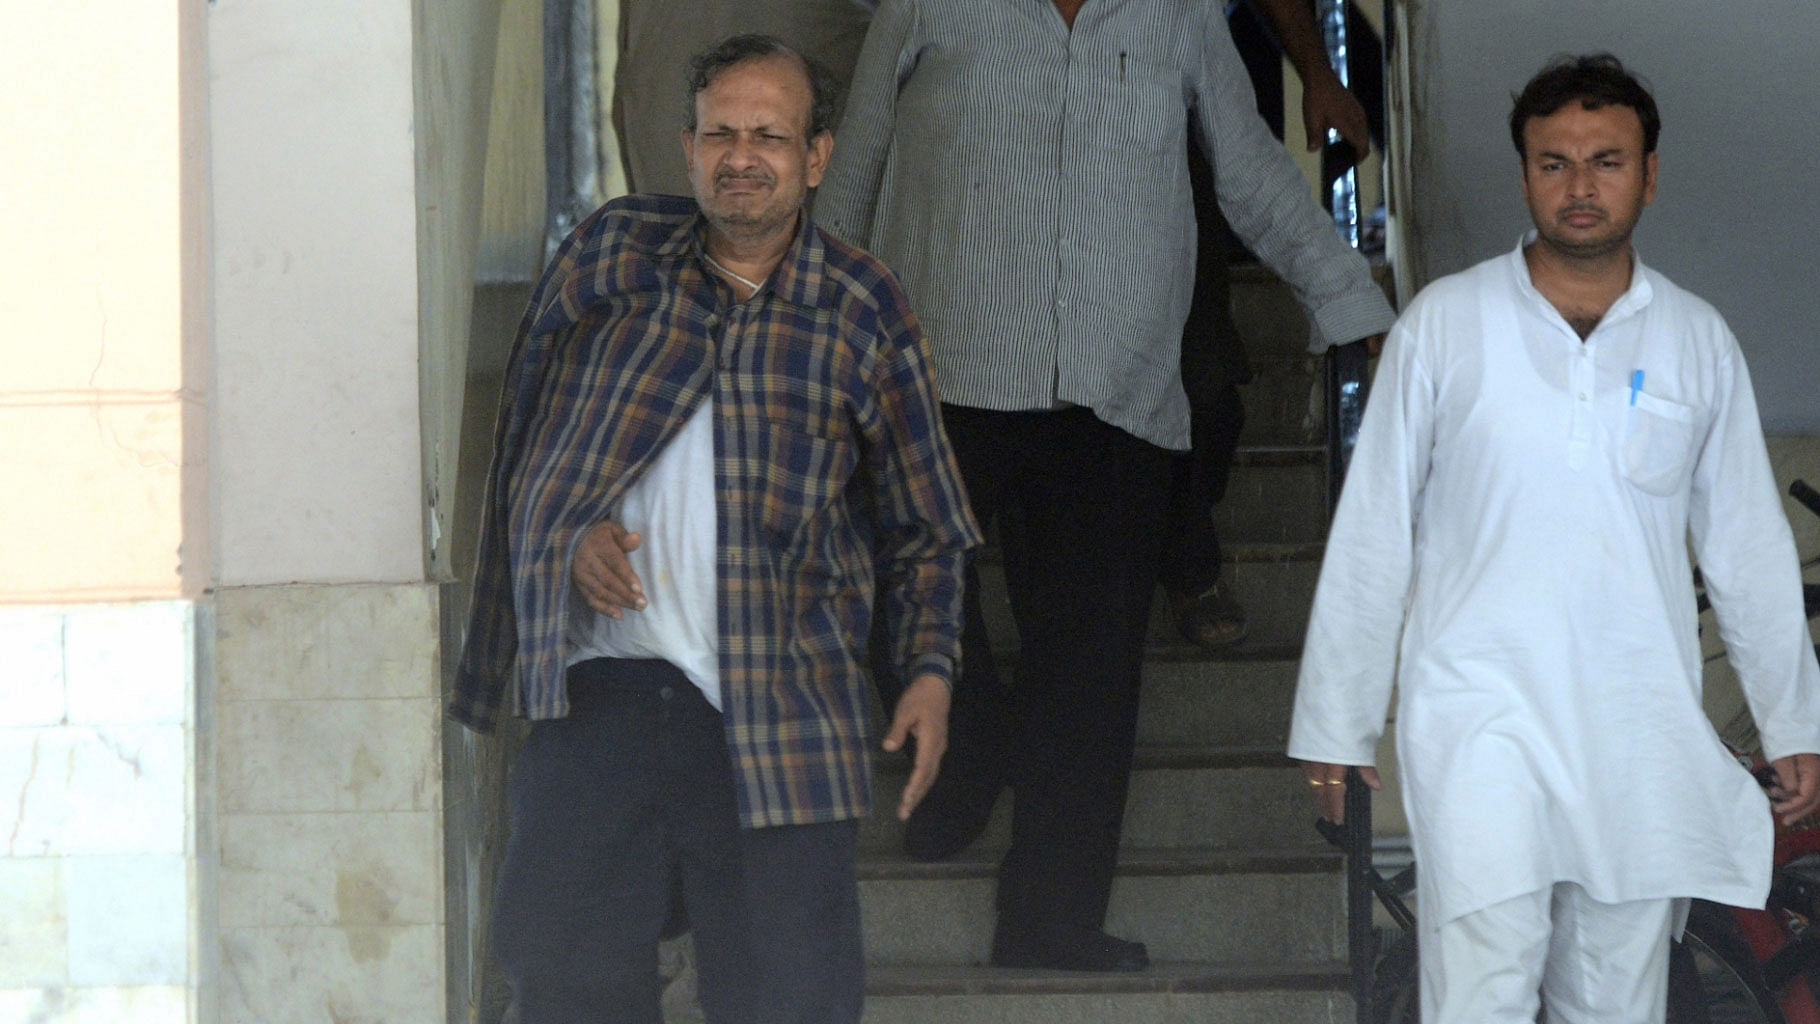 BK Bansal, senior official of the Ministry of Corporate Affairs who was arrested by CBI on bribery charges comes out of his residence in New Delhi on 20 July 2016. (Photo: IANS)